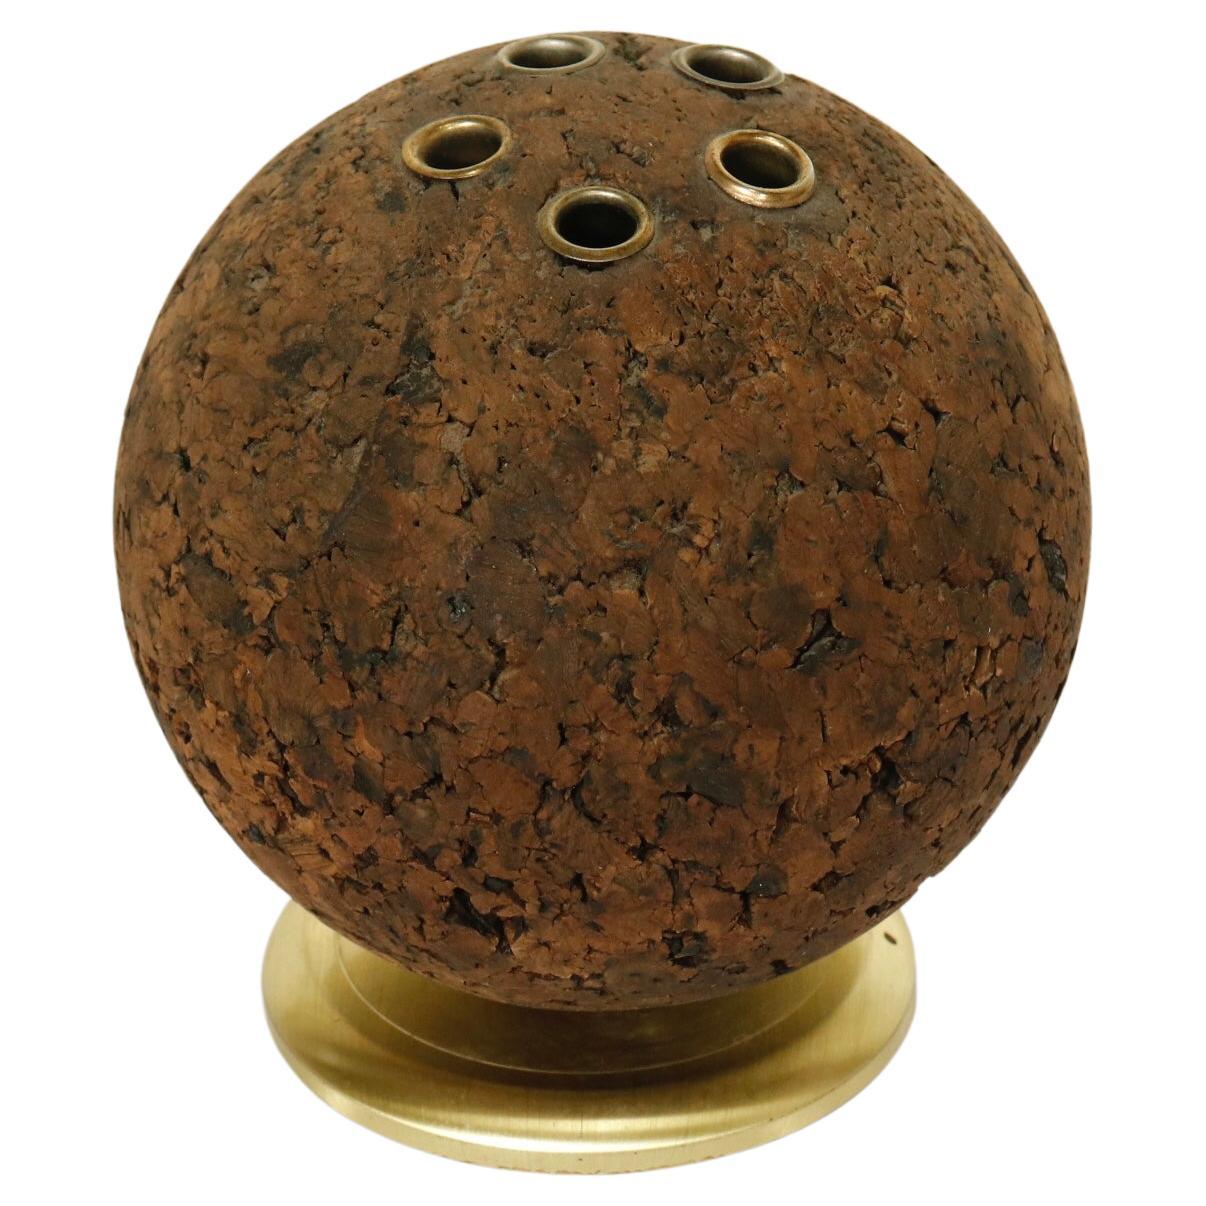 A spherical cork pen/pencil holder with brass swivel base. 

USA, circa 1960. 

Signed by maker.

Dimensions: 6” H x 5” W